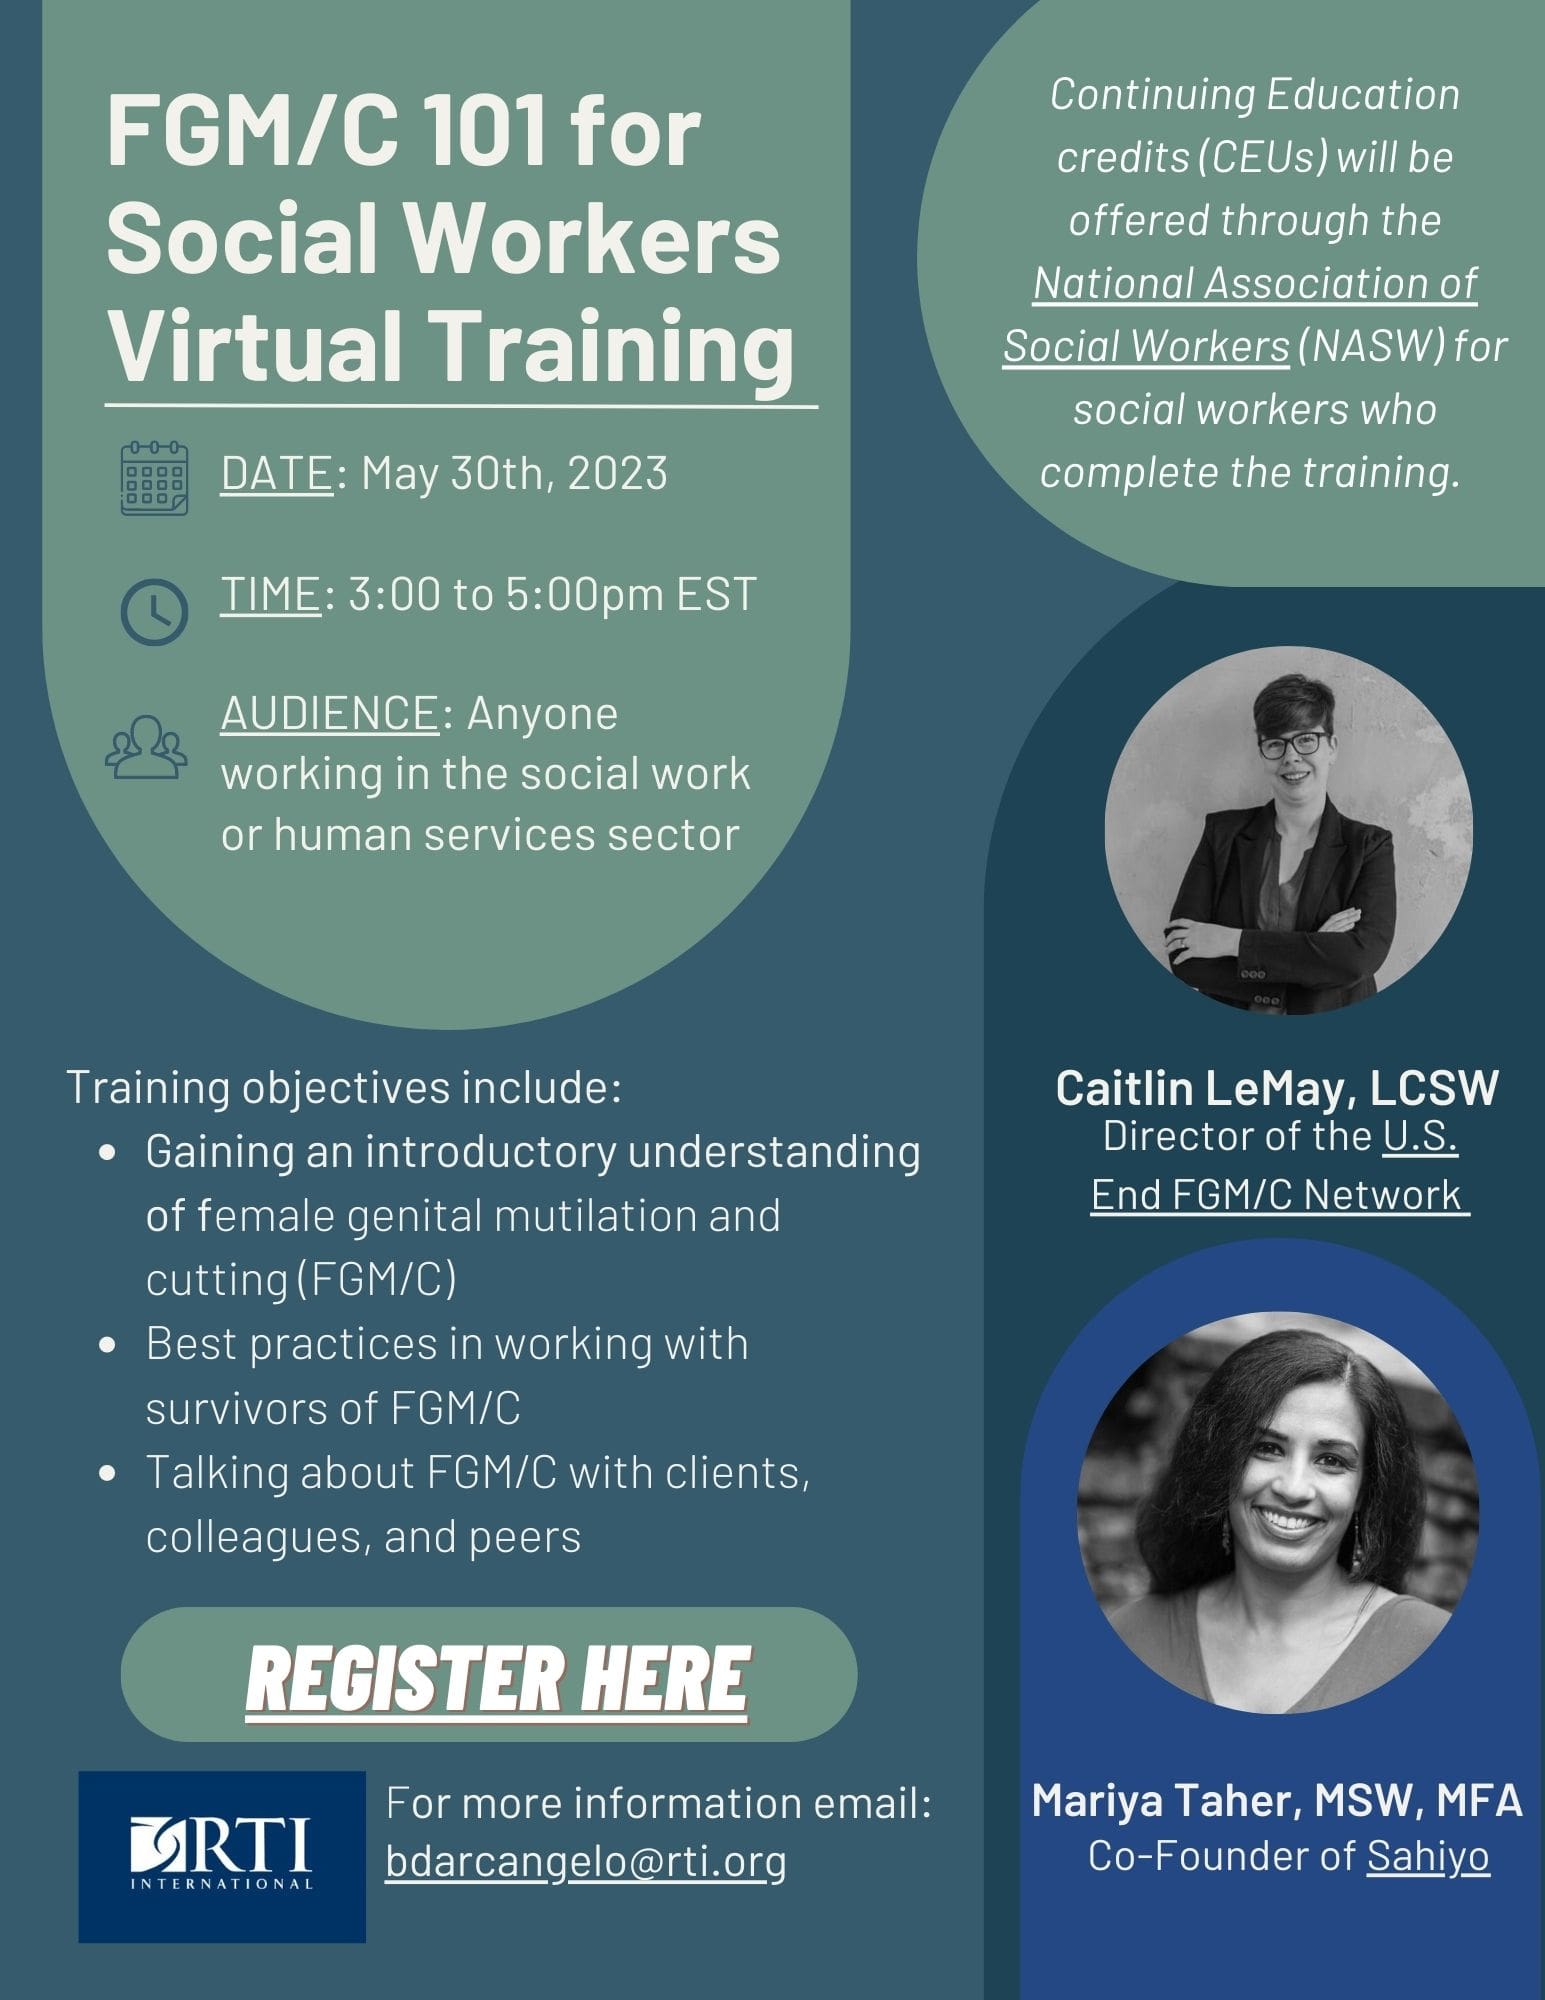 FGM/C 101 for Social Workers Virtual Training